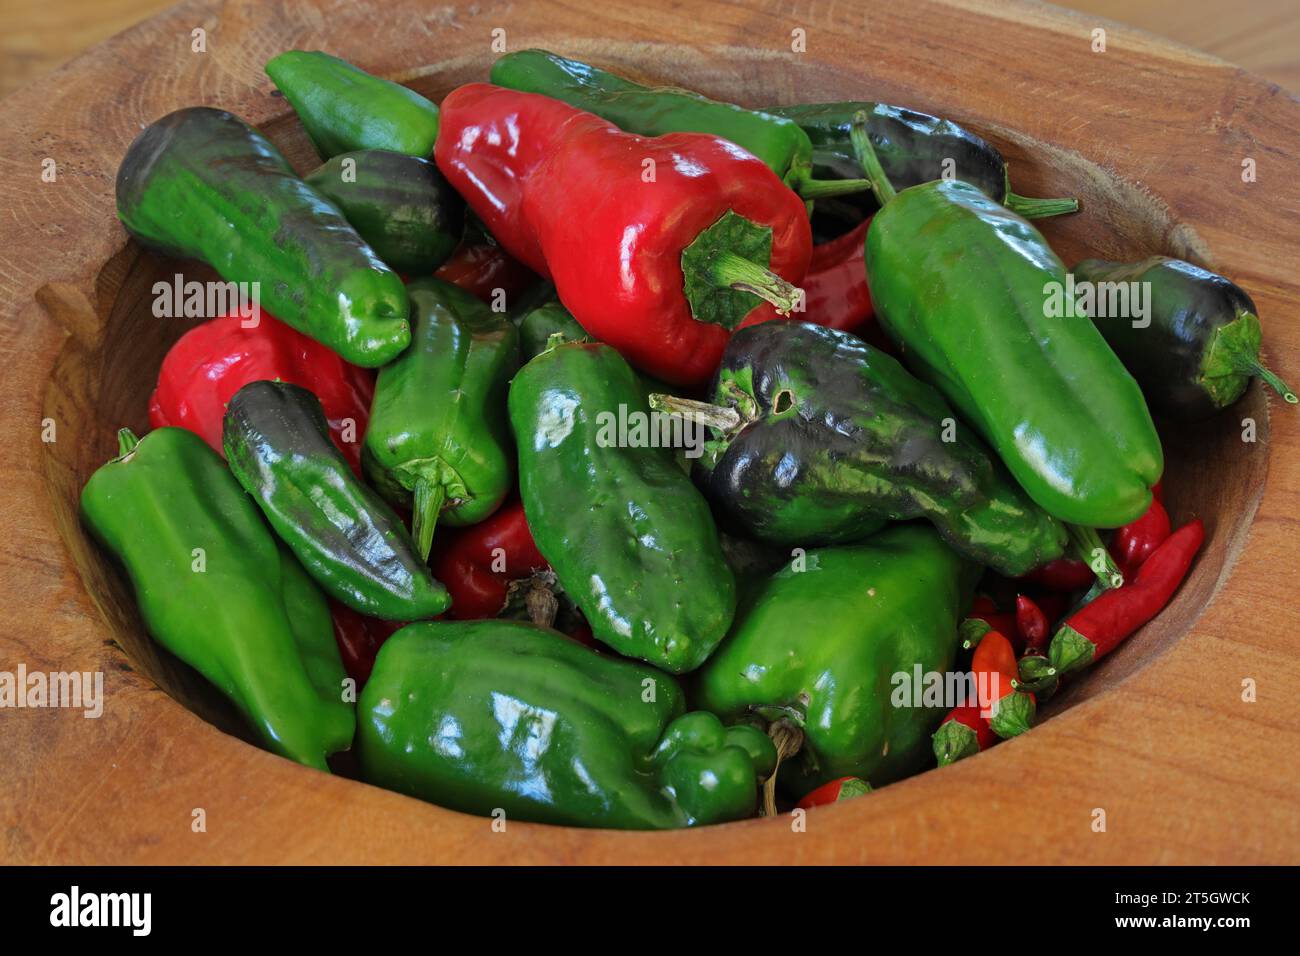 green and red pepper in a wooden bowl Stock Photo